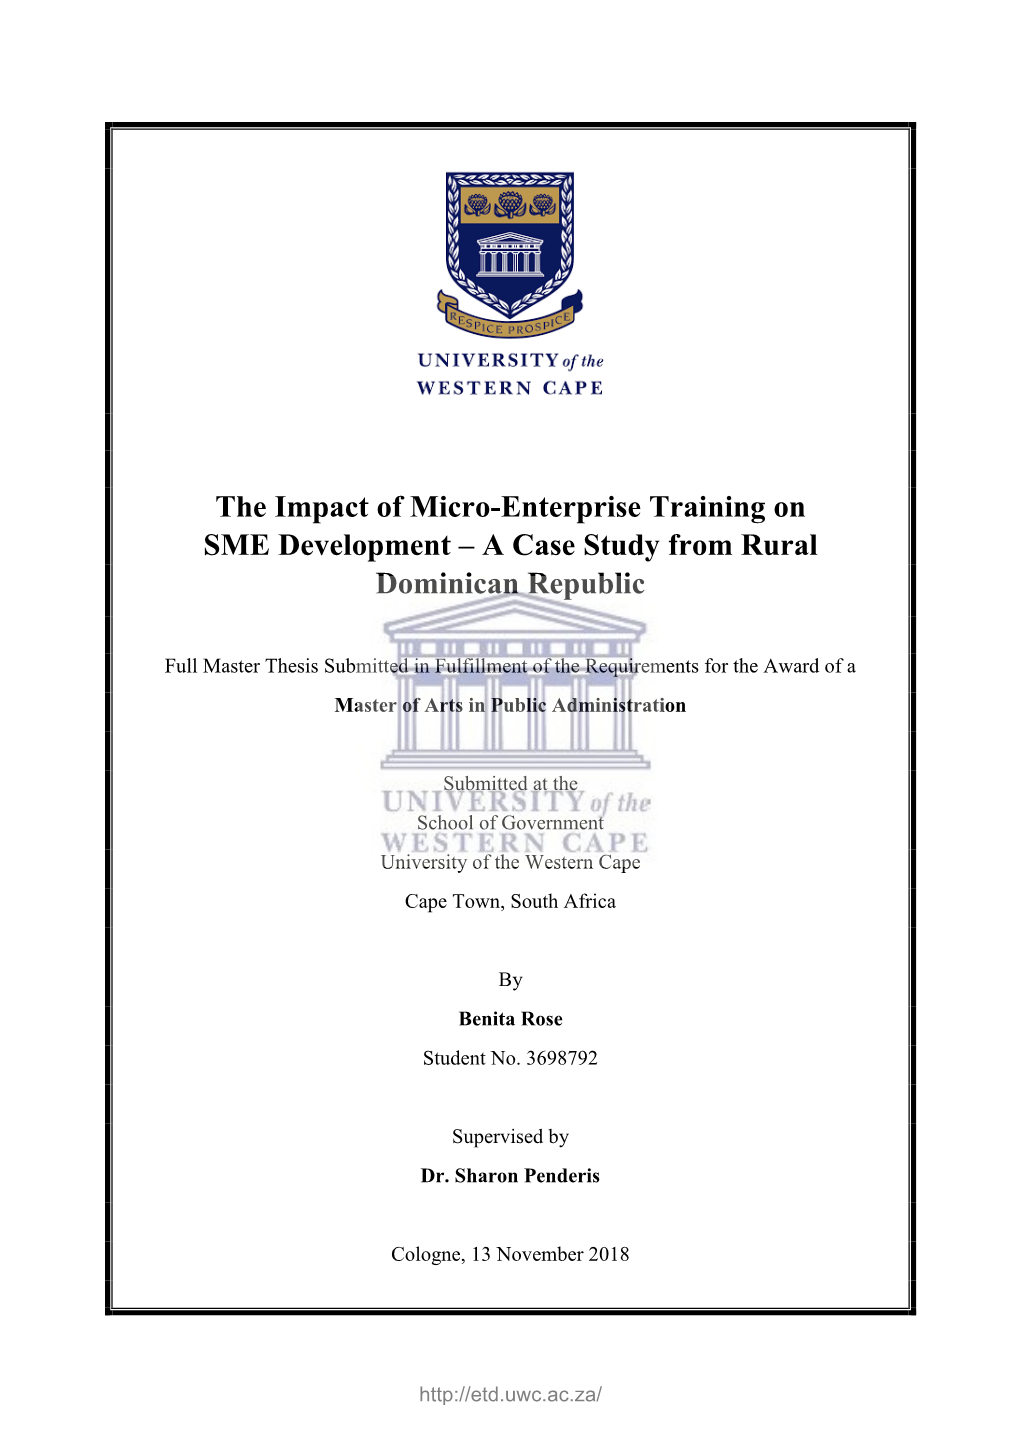 The Impact of Micro-Enterprise Training on SME Development – a Case Study from Rural Dominican Republic